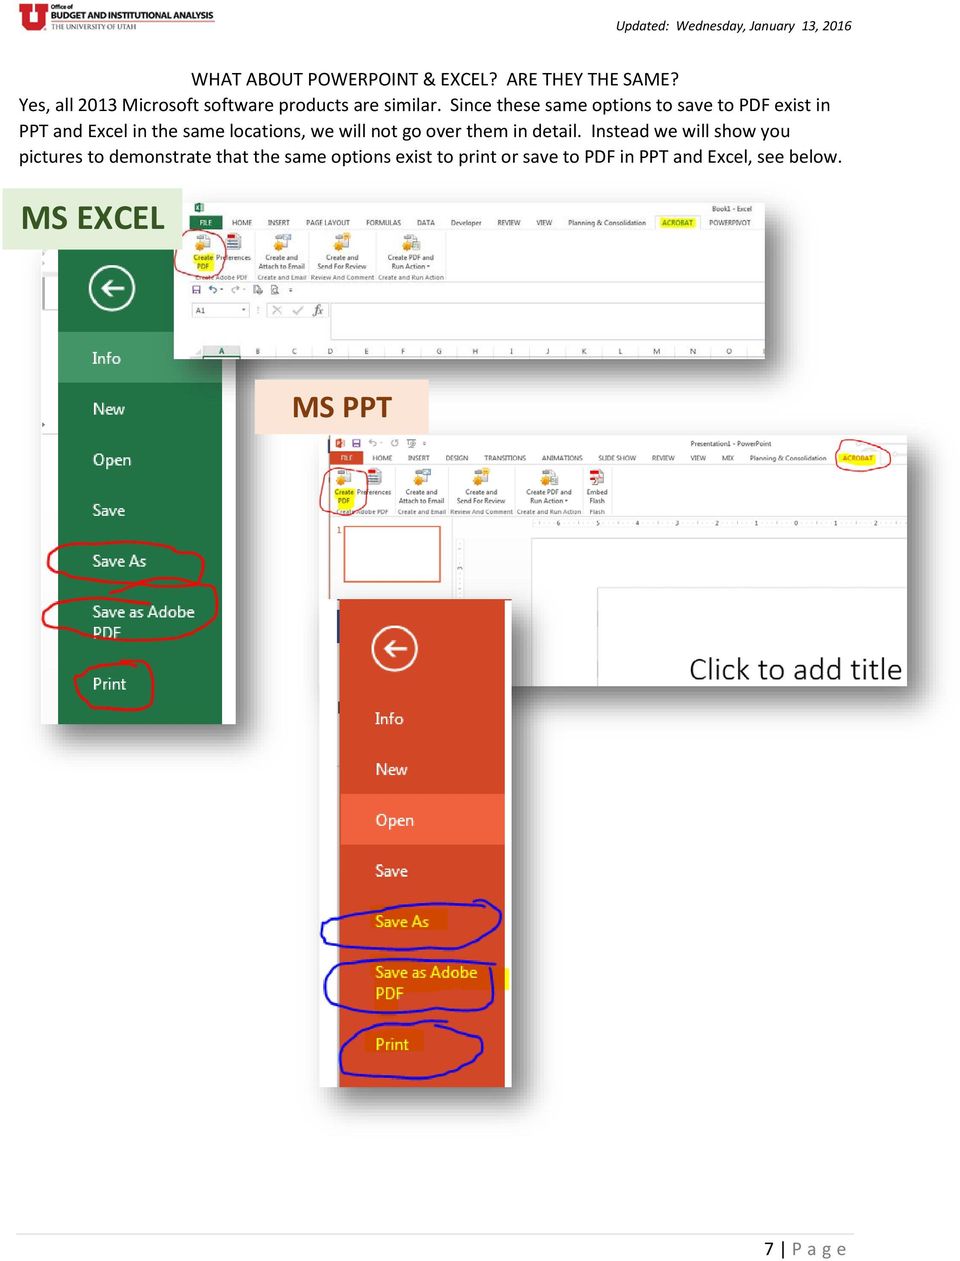 Since these same options to save to PDF exist in PPT and Excel in the same locations, we will